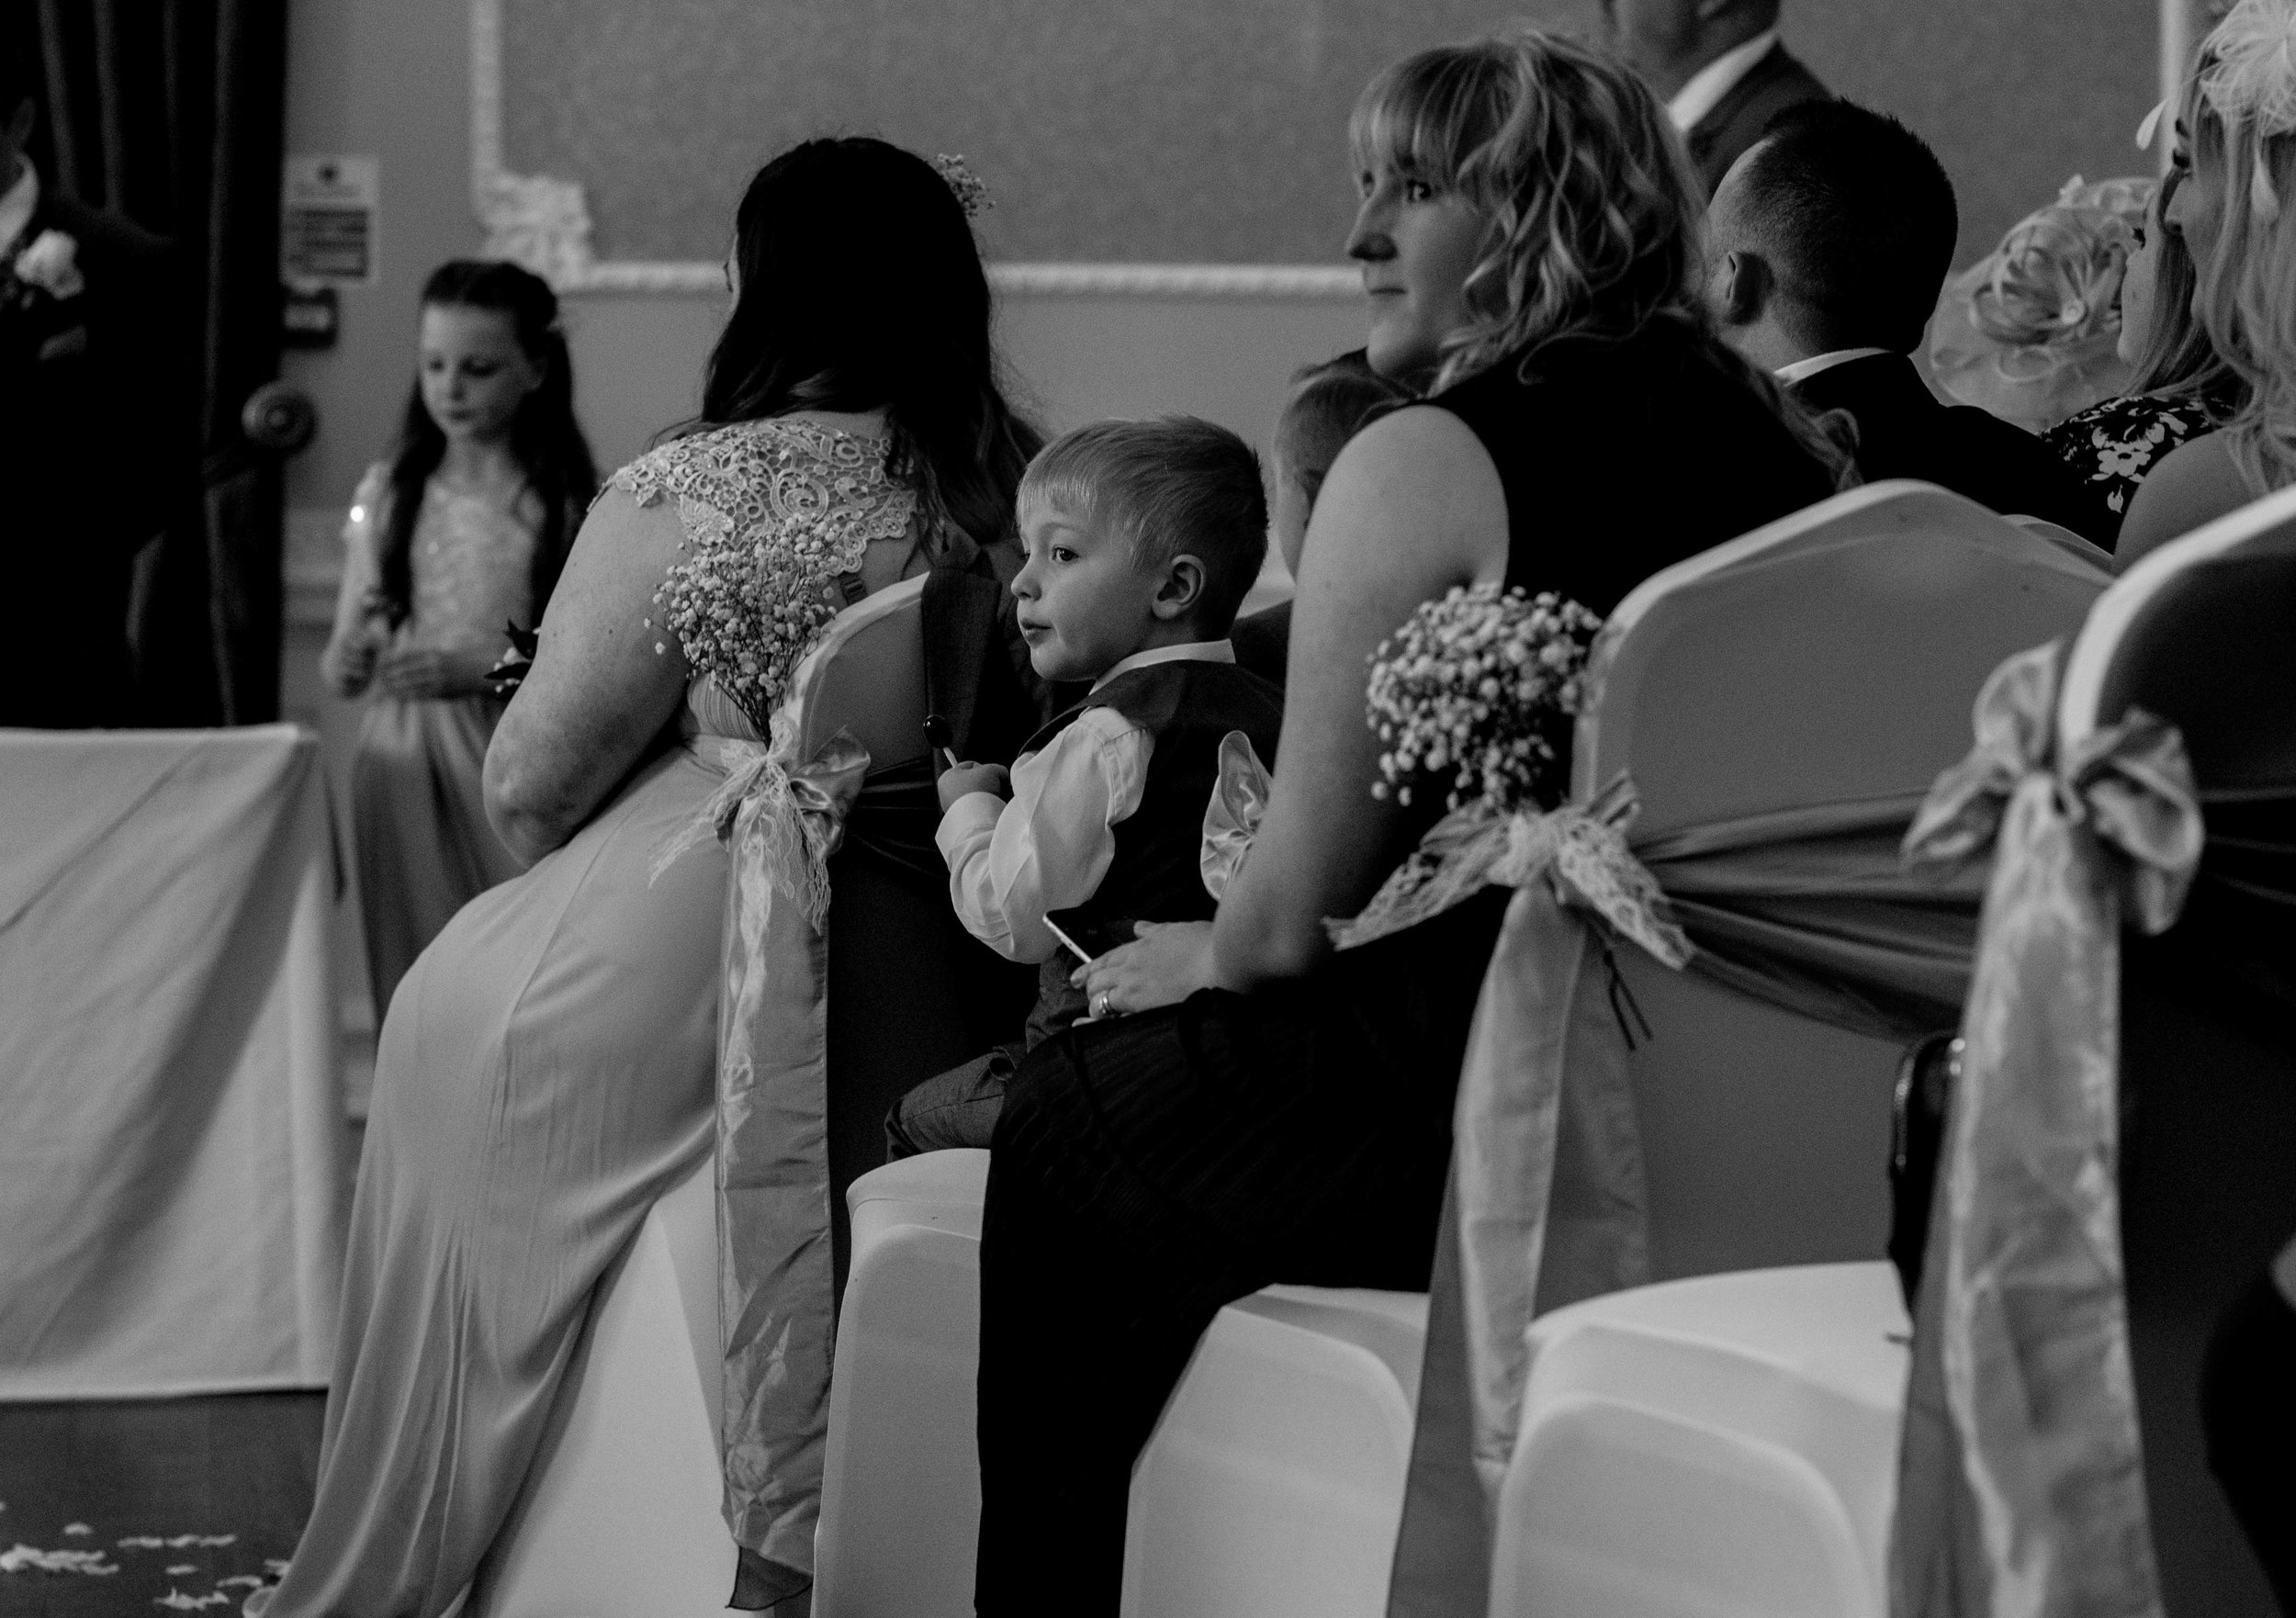 A young page boy sits quietly during the wedding ceremony